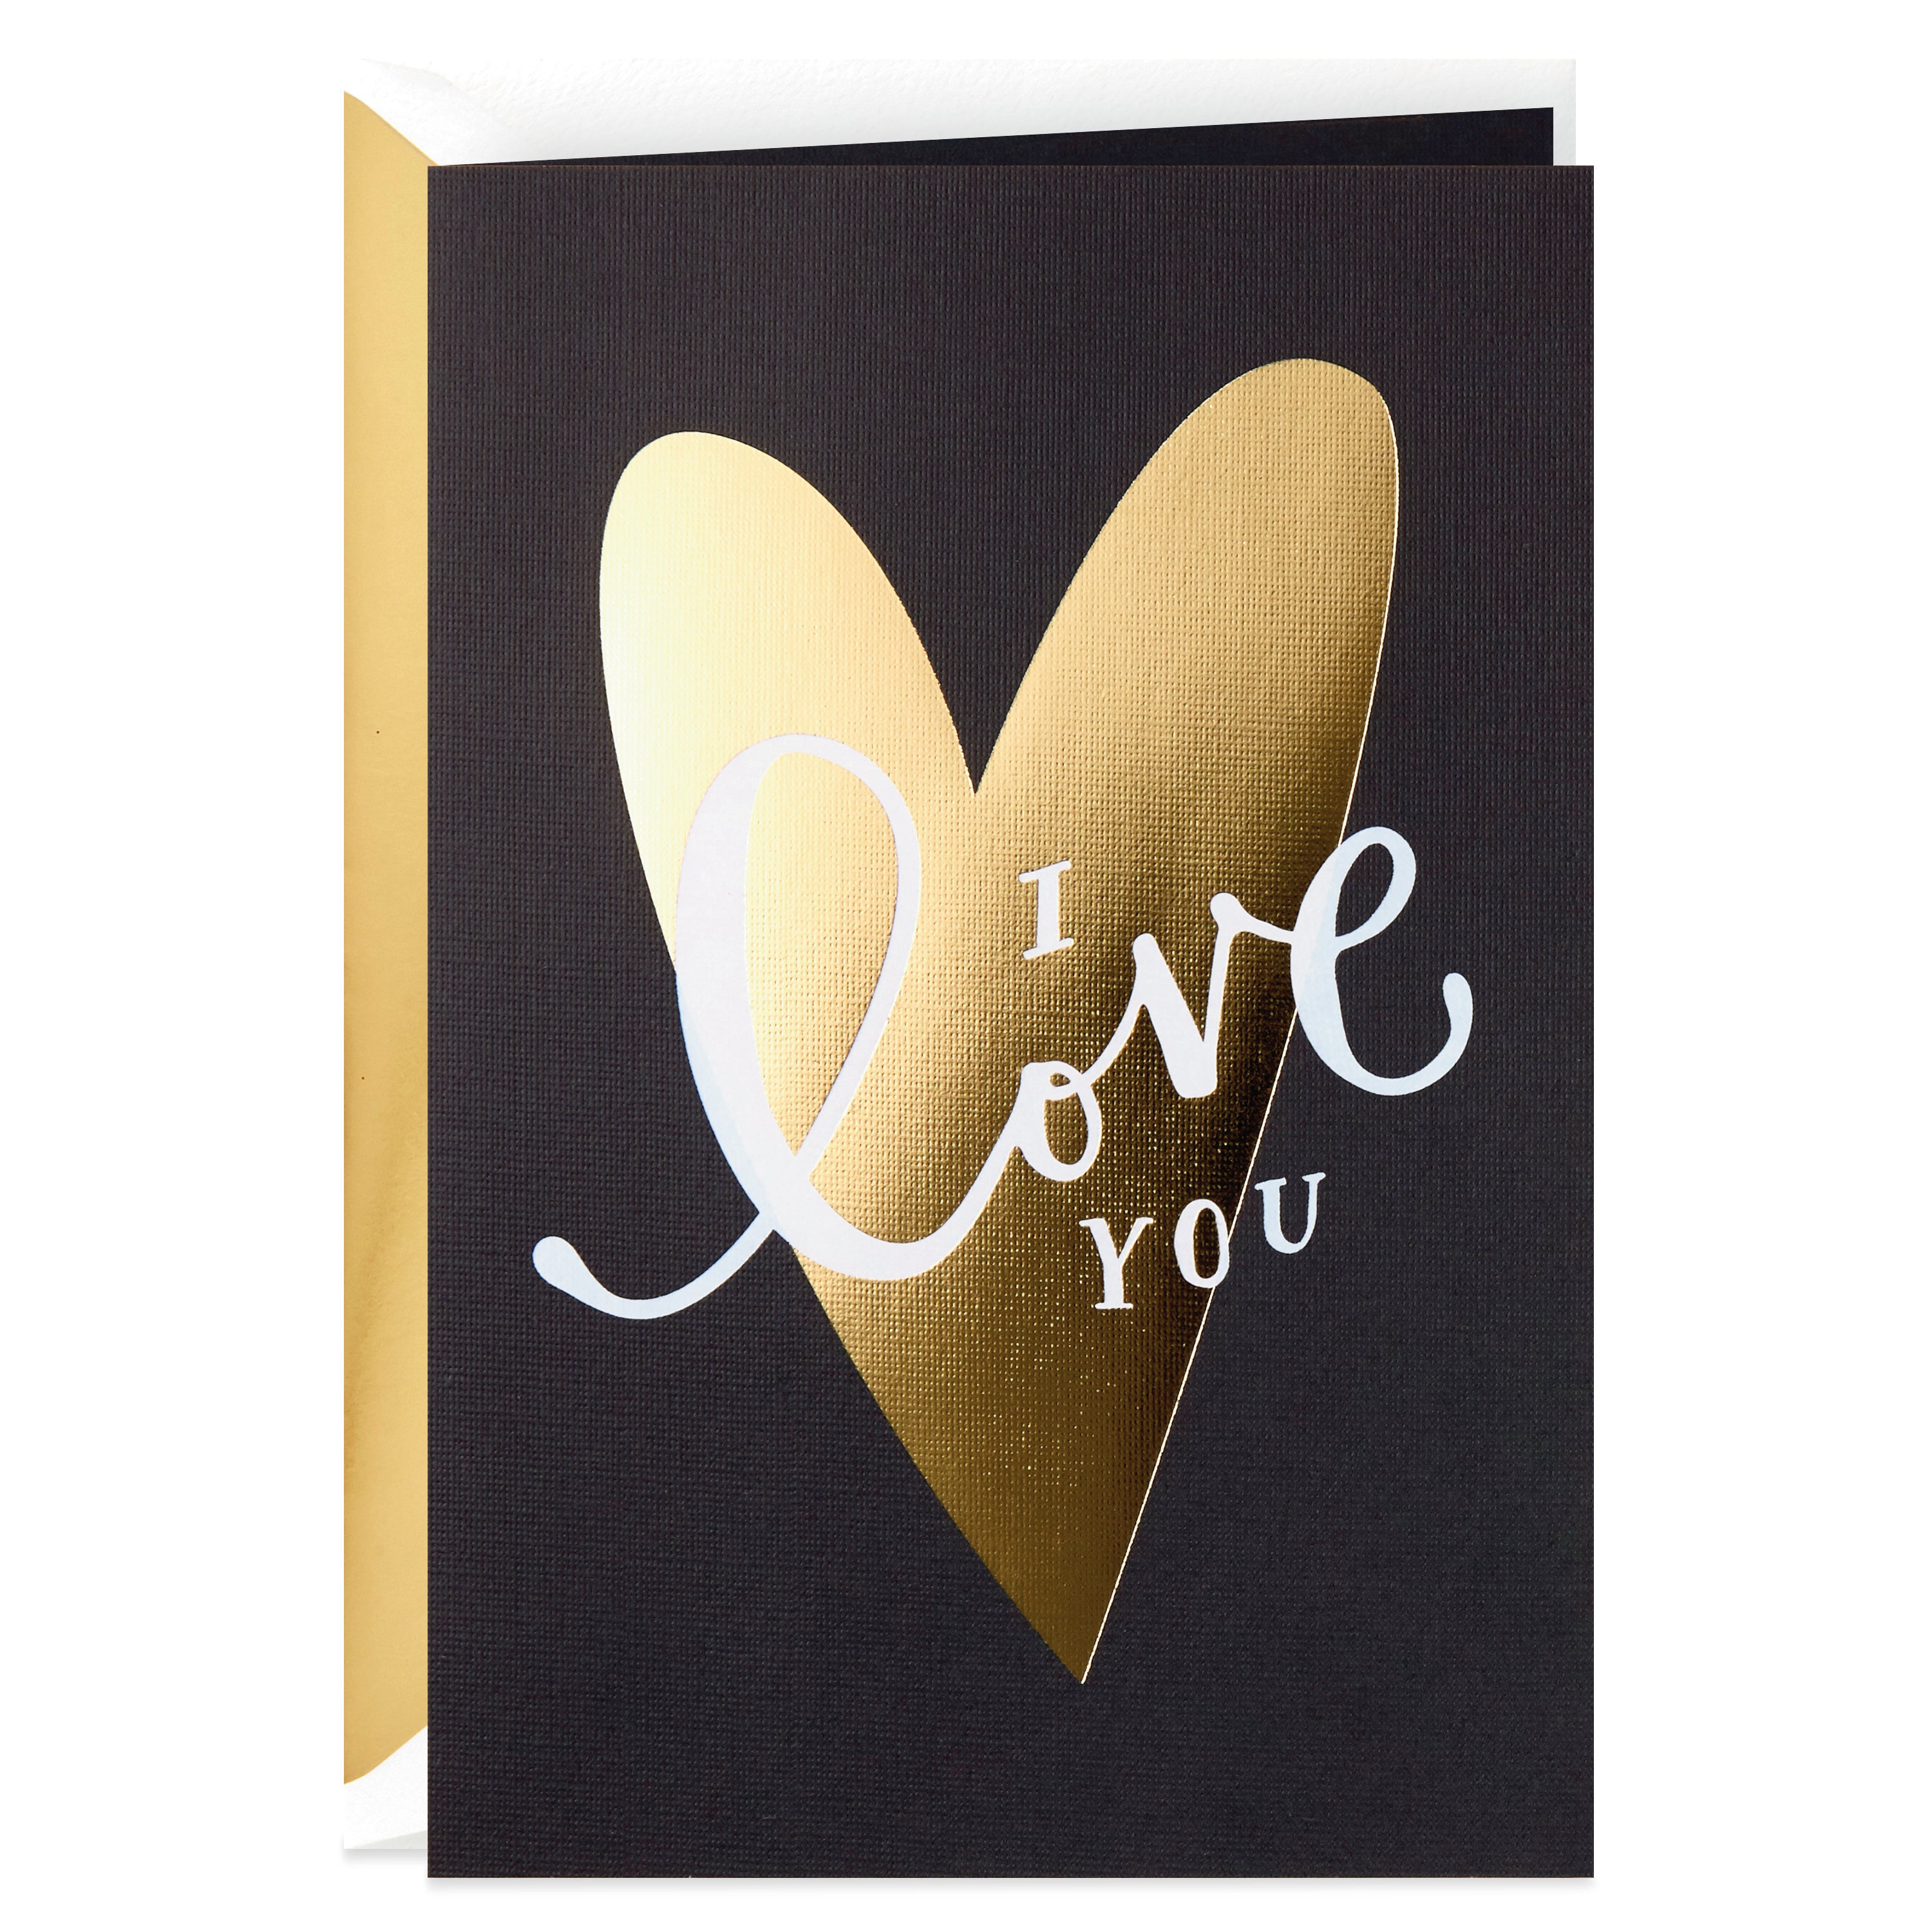 Hallmark 729VFE1191 Valentines Day Card for Wife or Girlfriend (Beautiful  You)